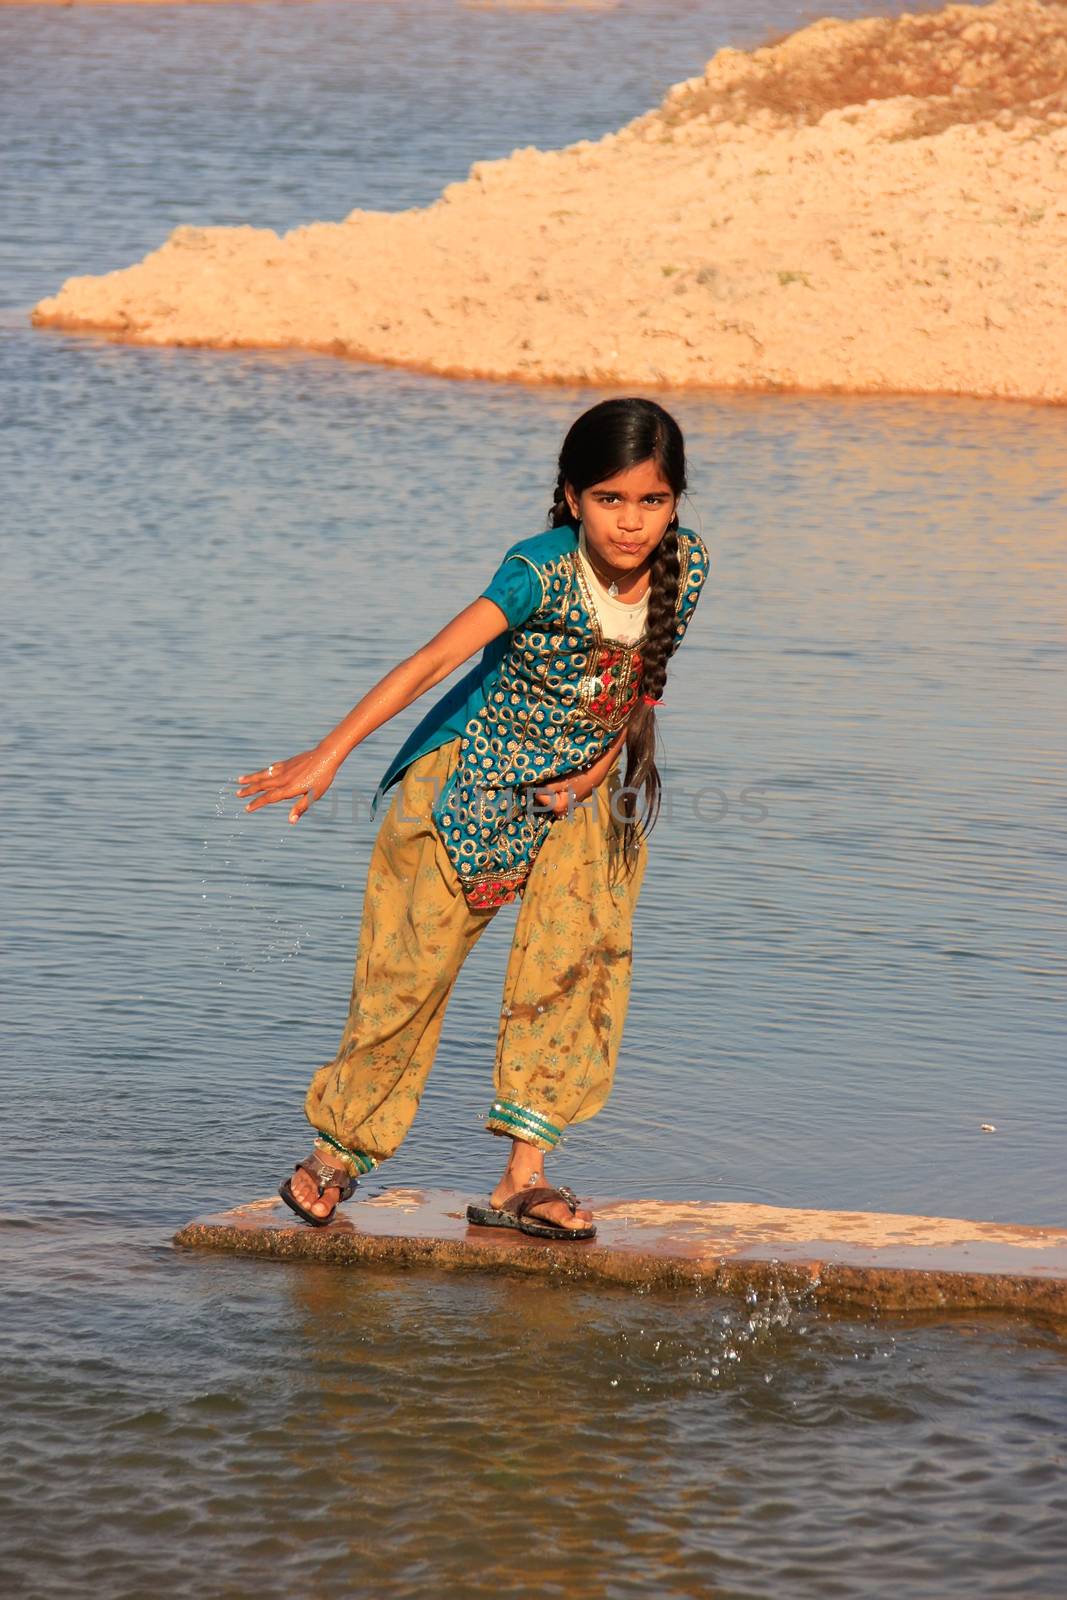 Local girl playing near water reservoir, Khichan village, India by donya_nedomam